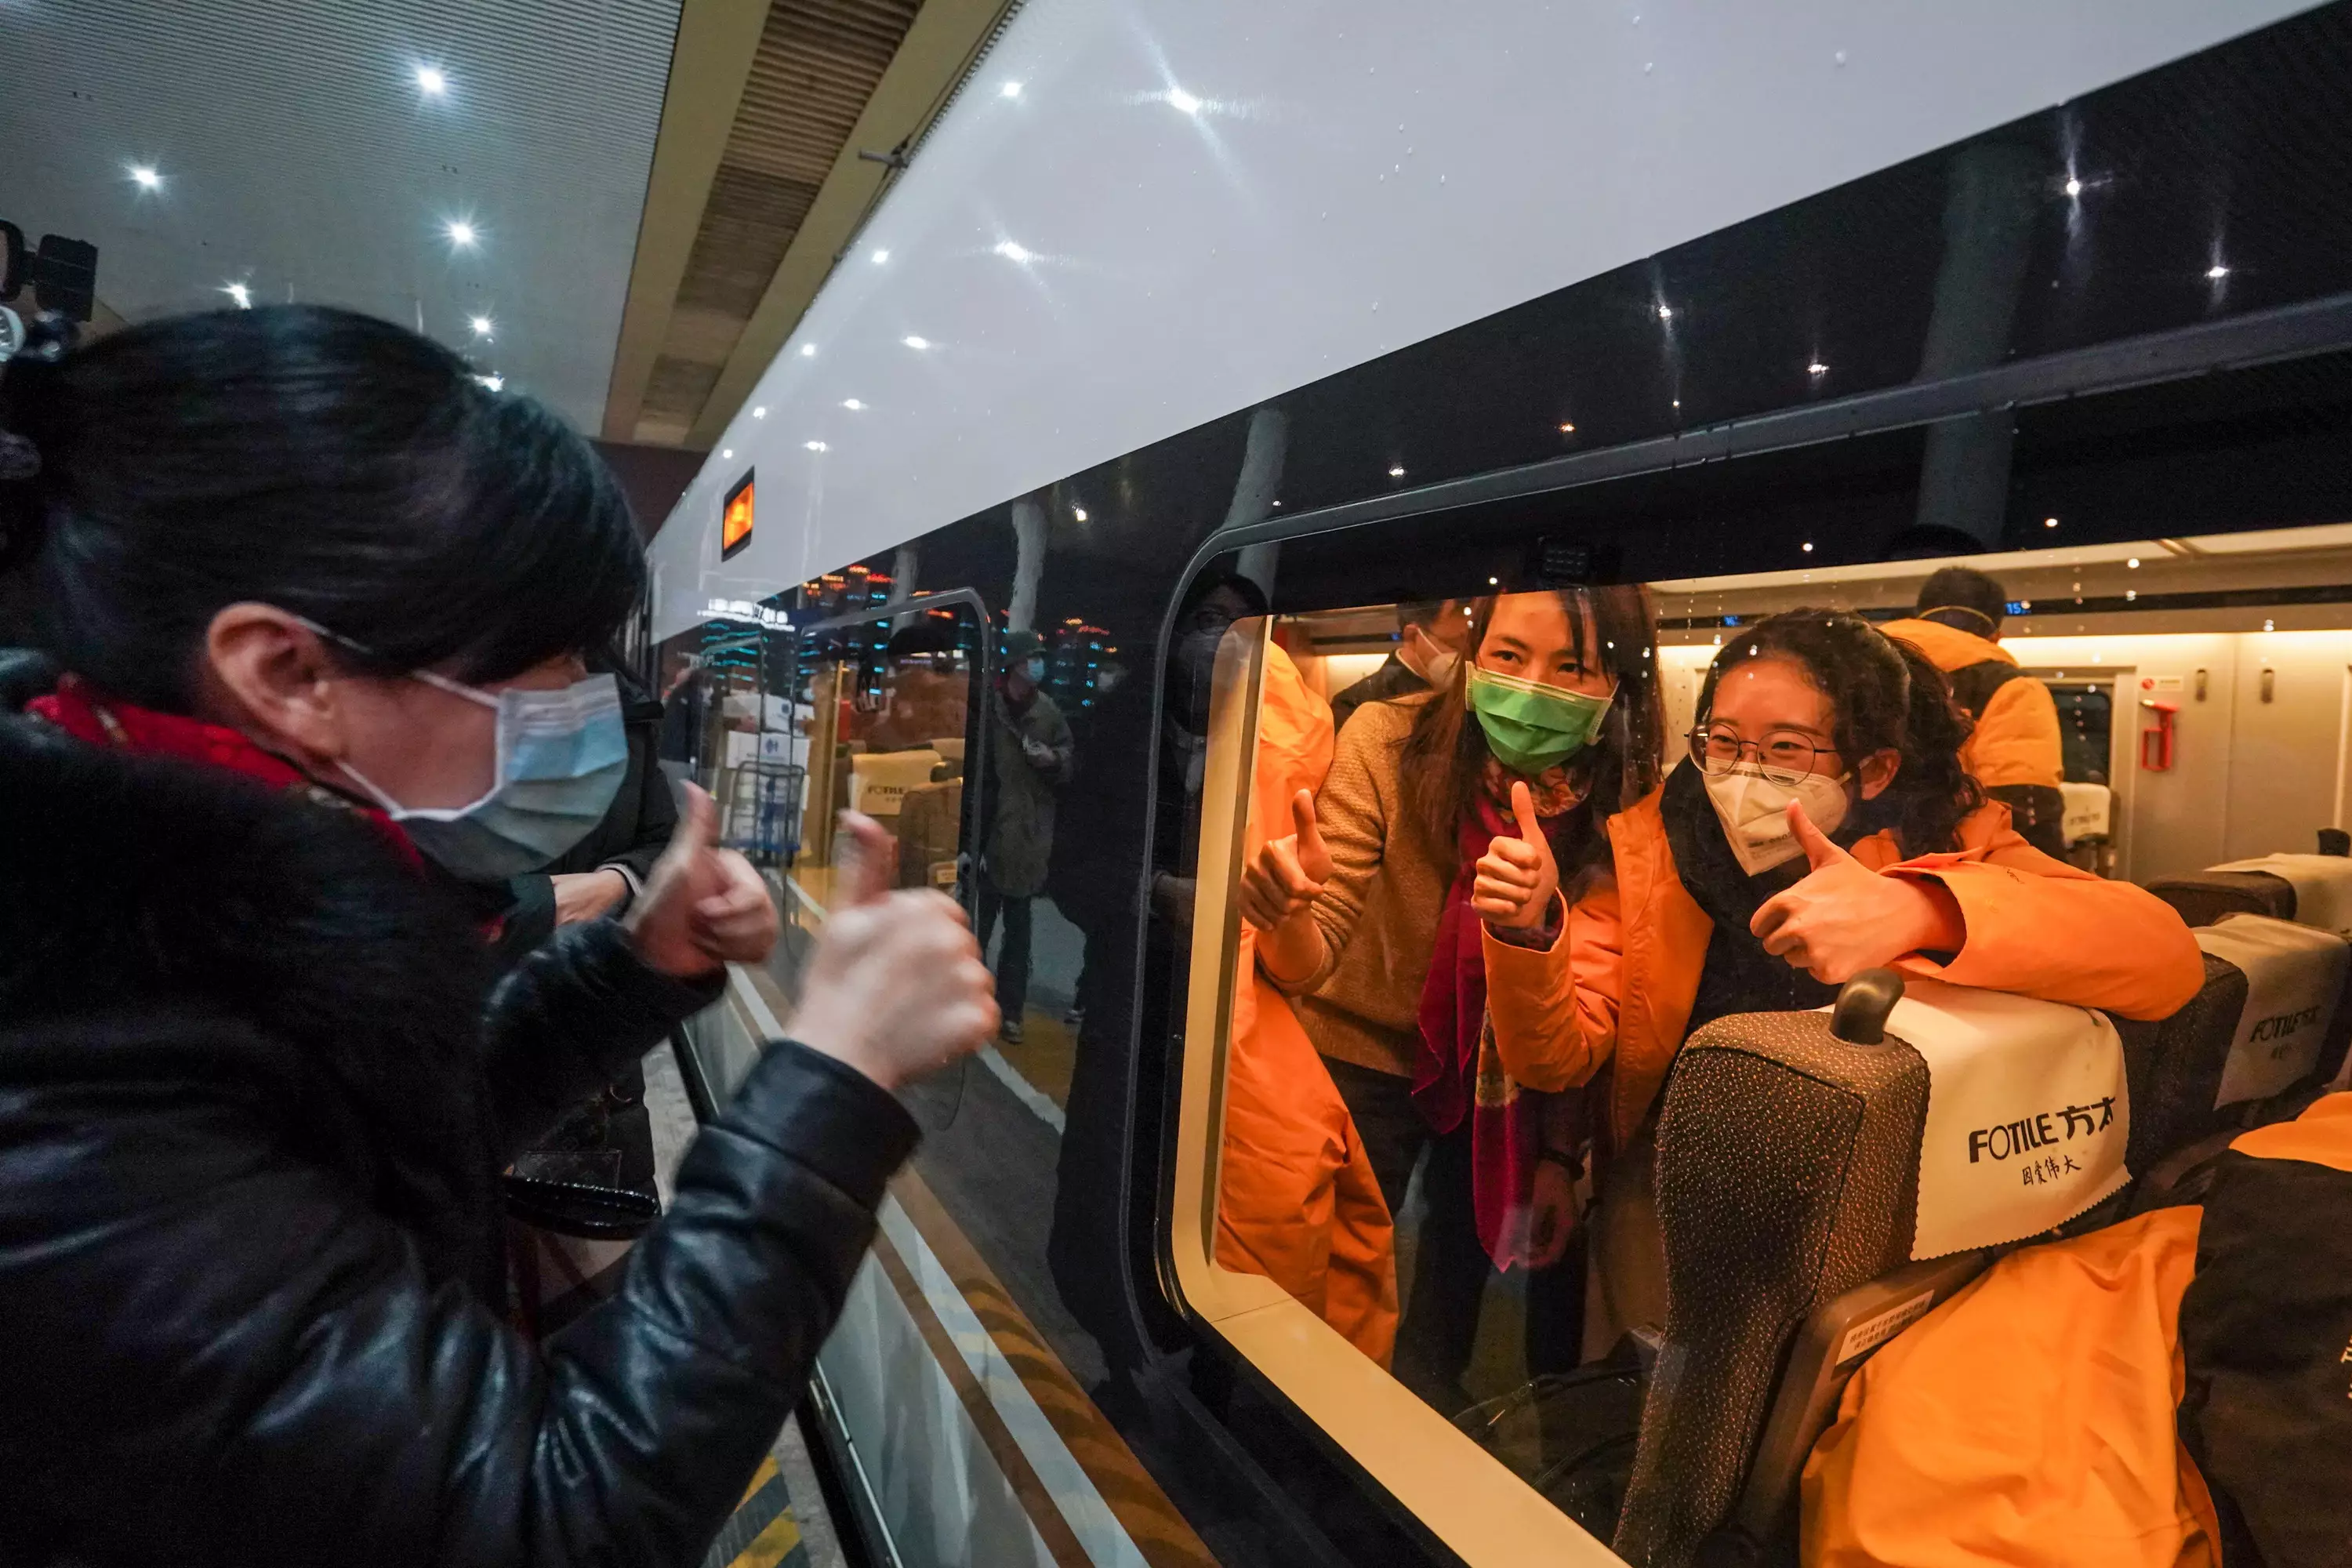 A relative encourages the medical staff at Nanjing South Railway Station on January 25 2020.